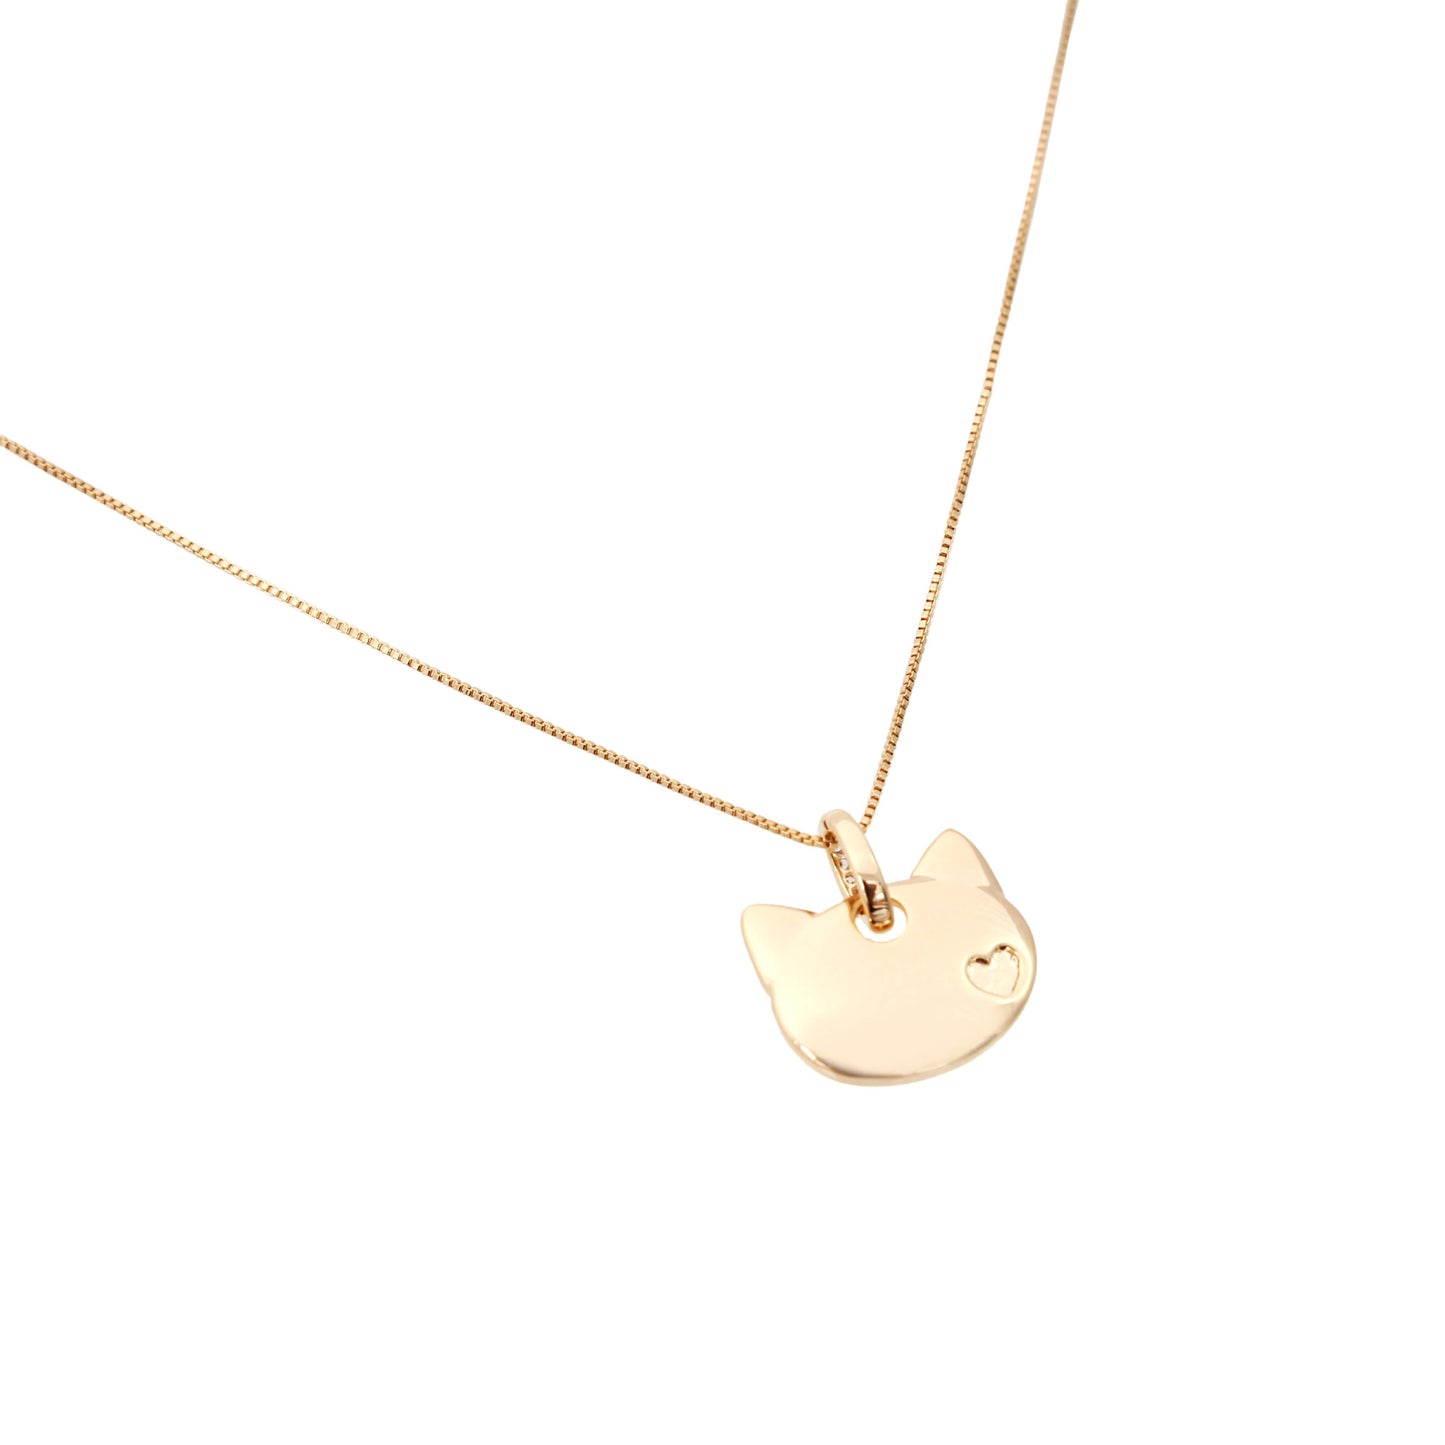 18K gold plated necklace with a cat medal